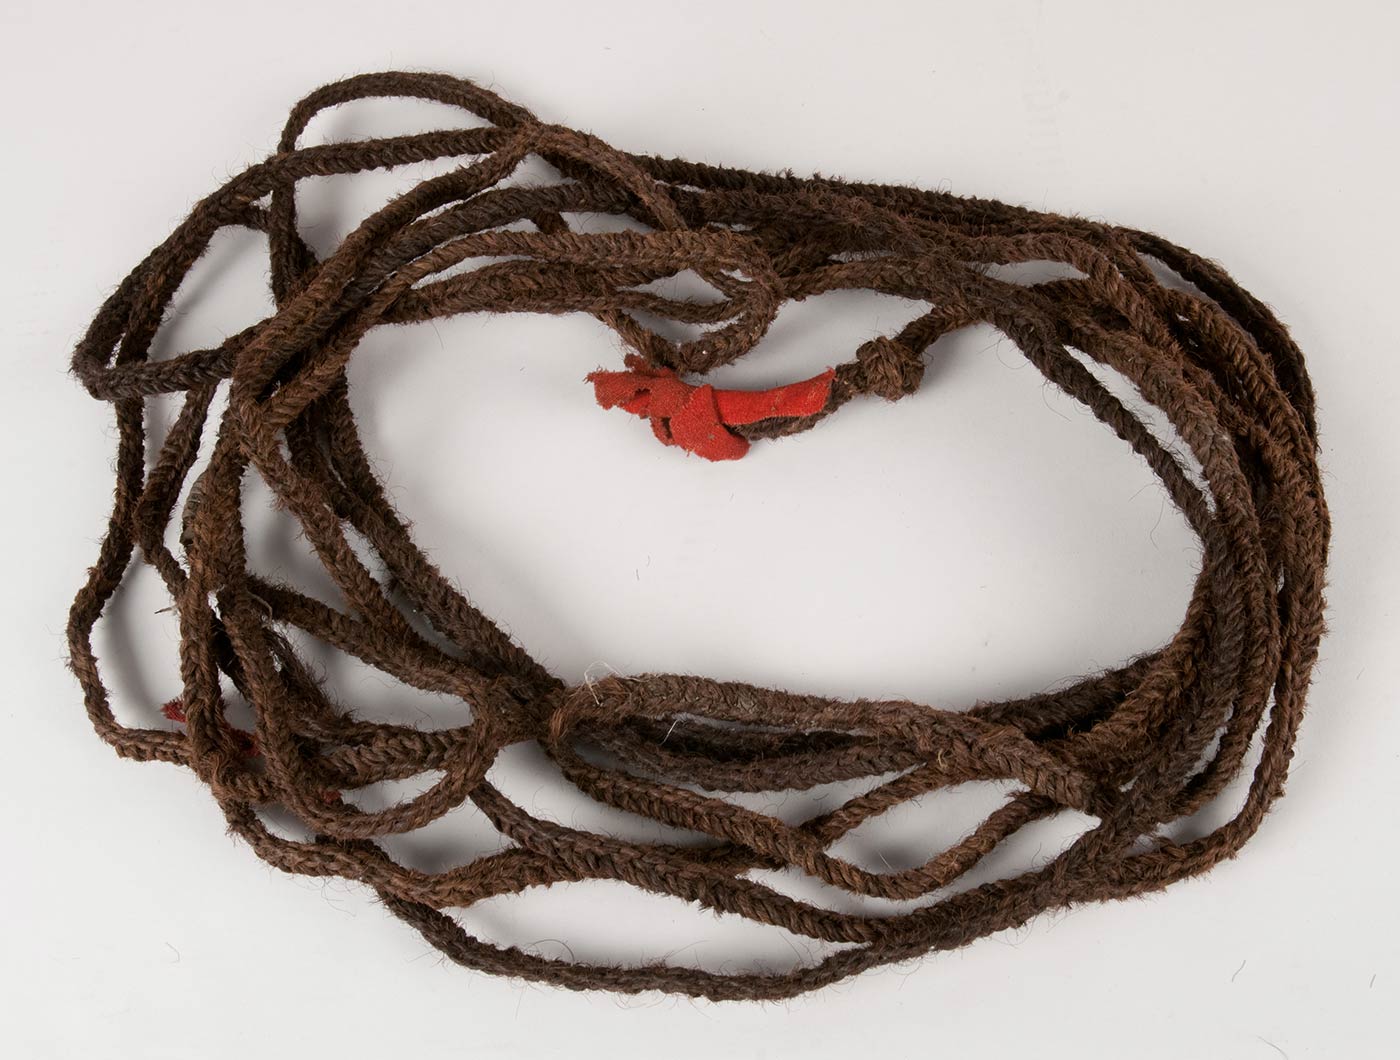 Woven bison hair rope with knotted ends decorated with red wool broadcloth